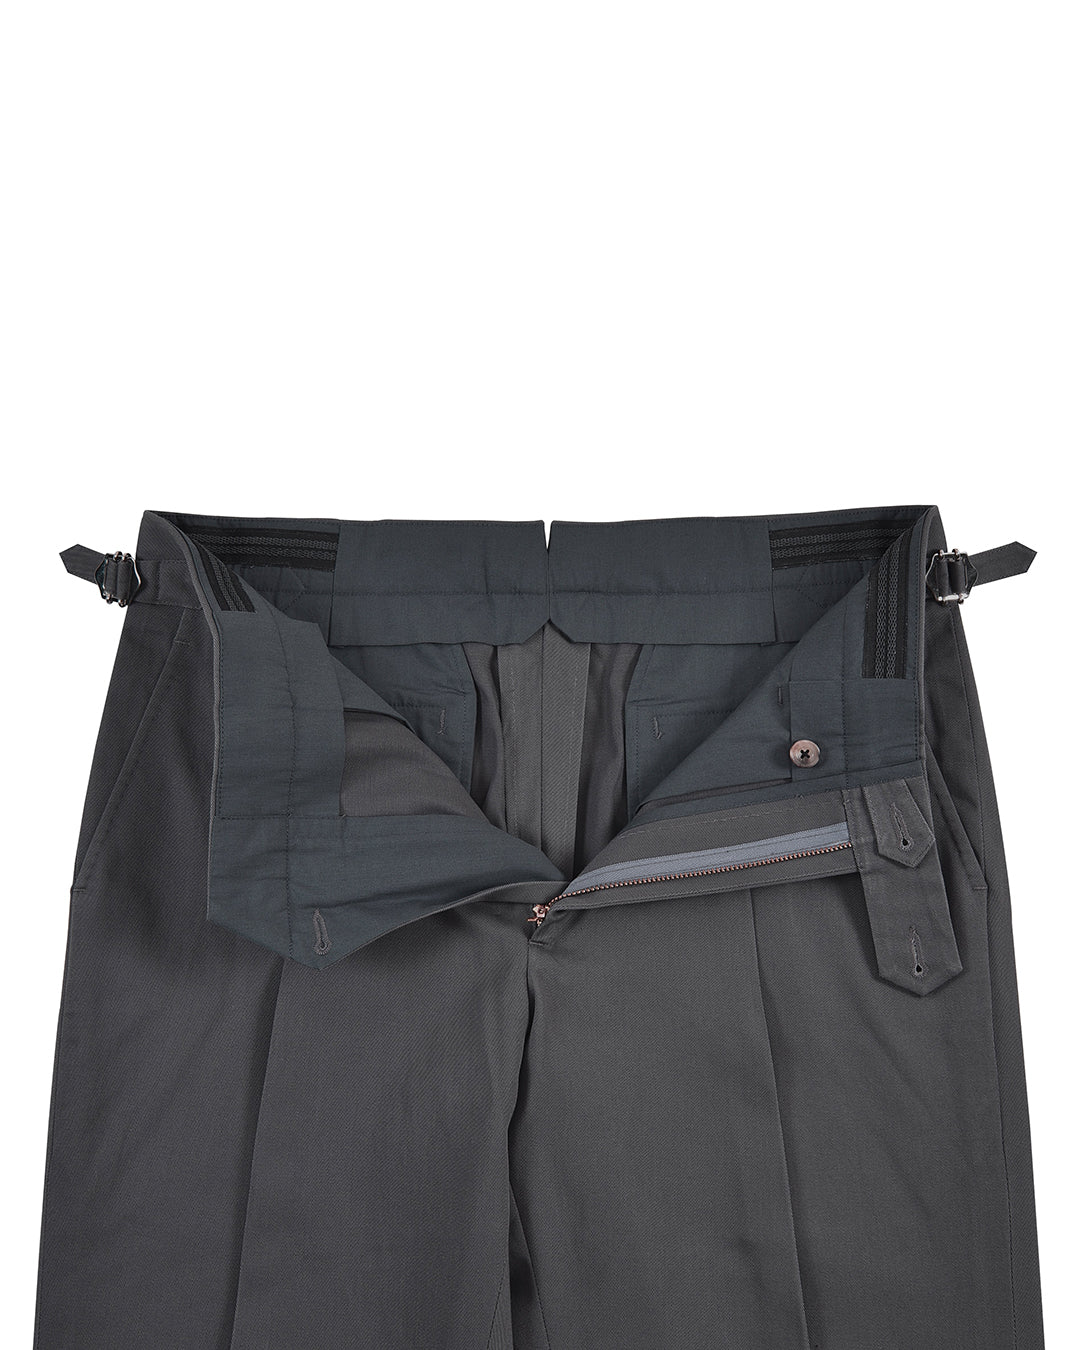 Washed Charcoal Cotton Twill Dress Pant